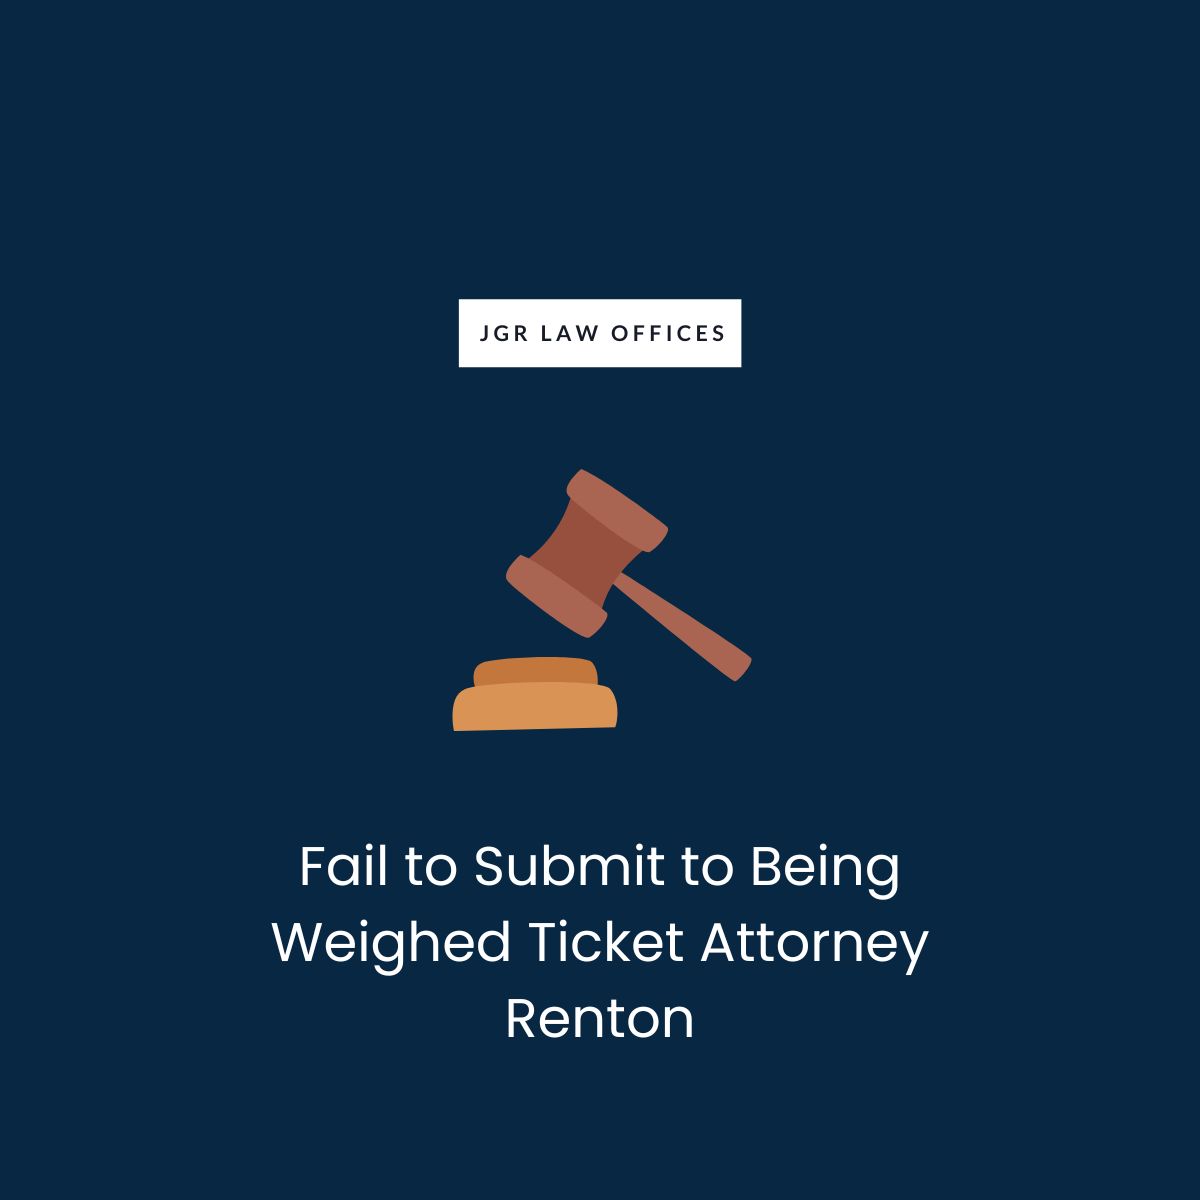 Fail to Submit to Being Weighed Ticket Attorney Renton